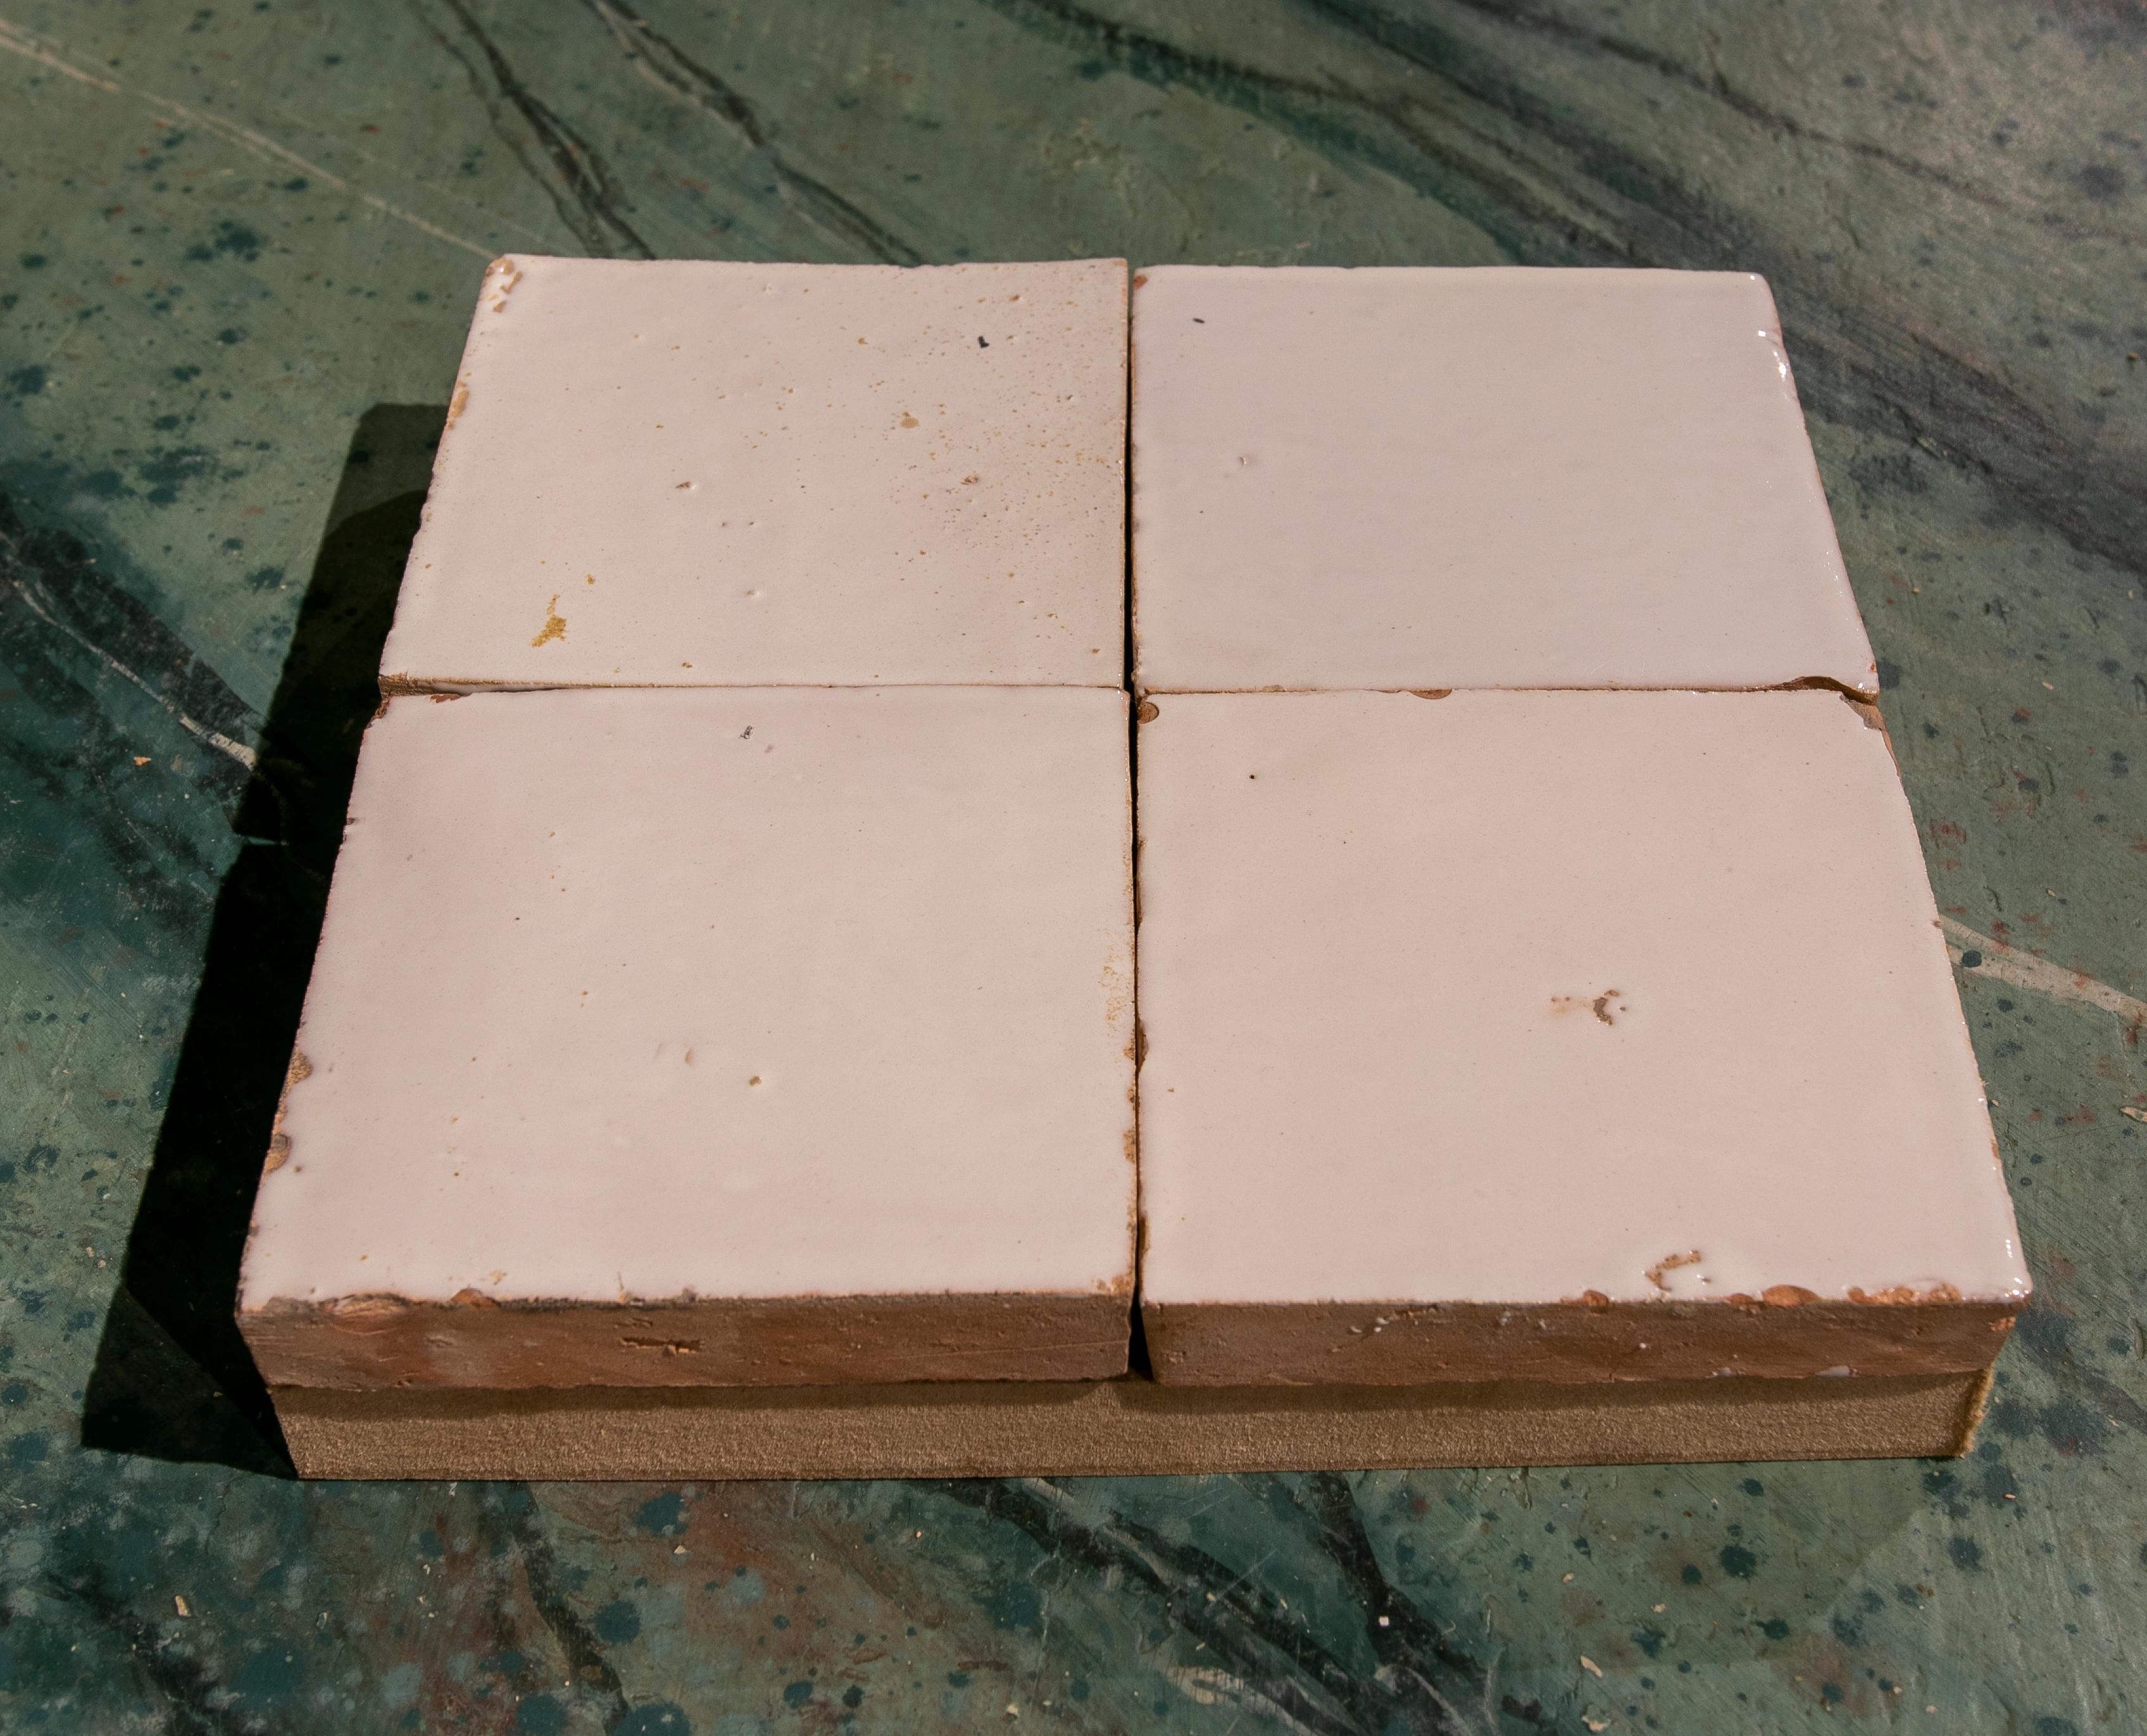 Handmade glazed Zelige tile in white color in size 10x10 cm.

Price per M2 of 175 euro, which corresponds to 100 tiles of 10x10 cm.